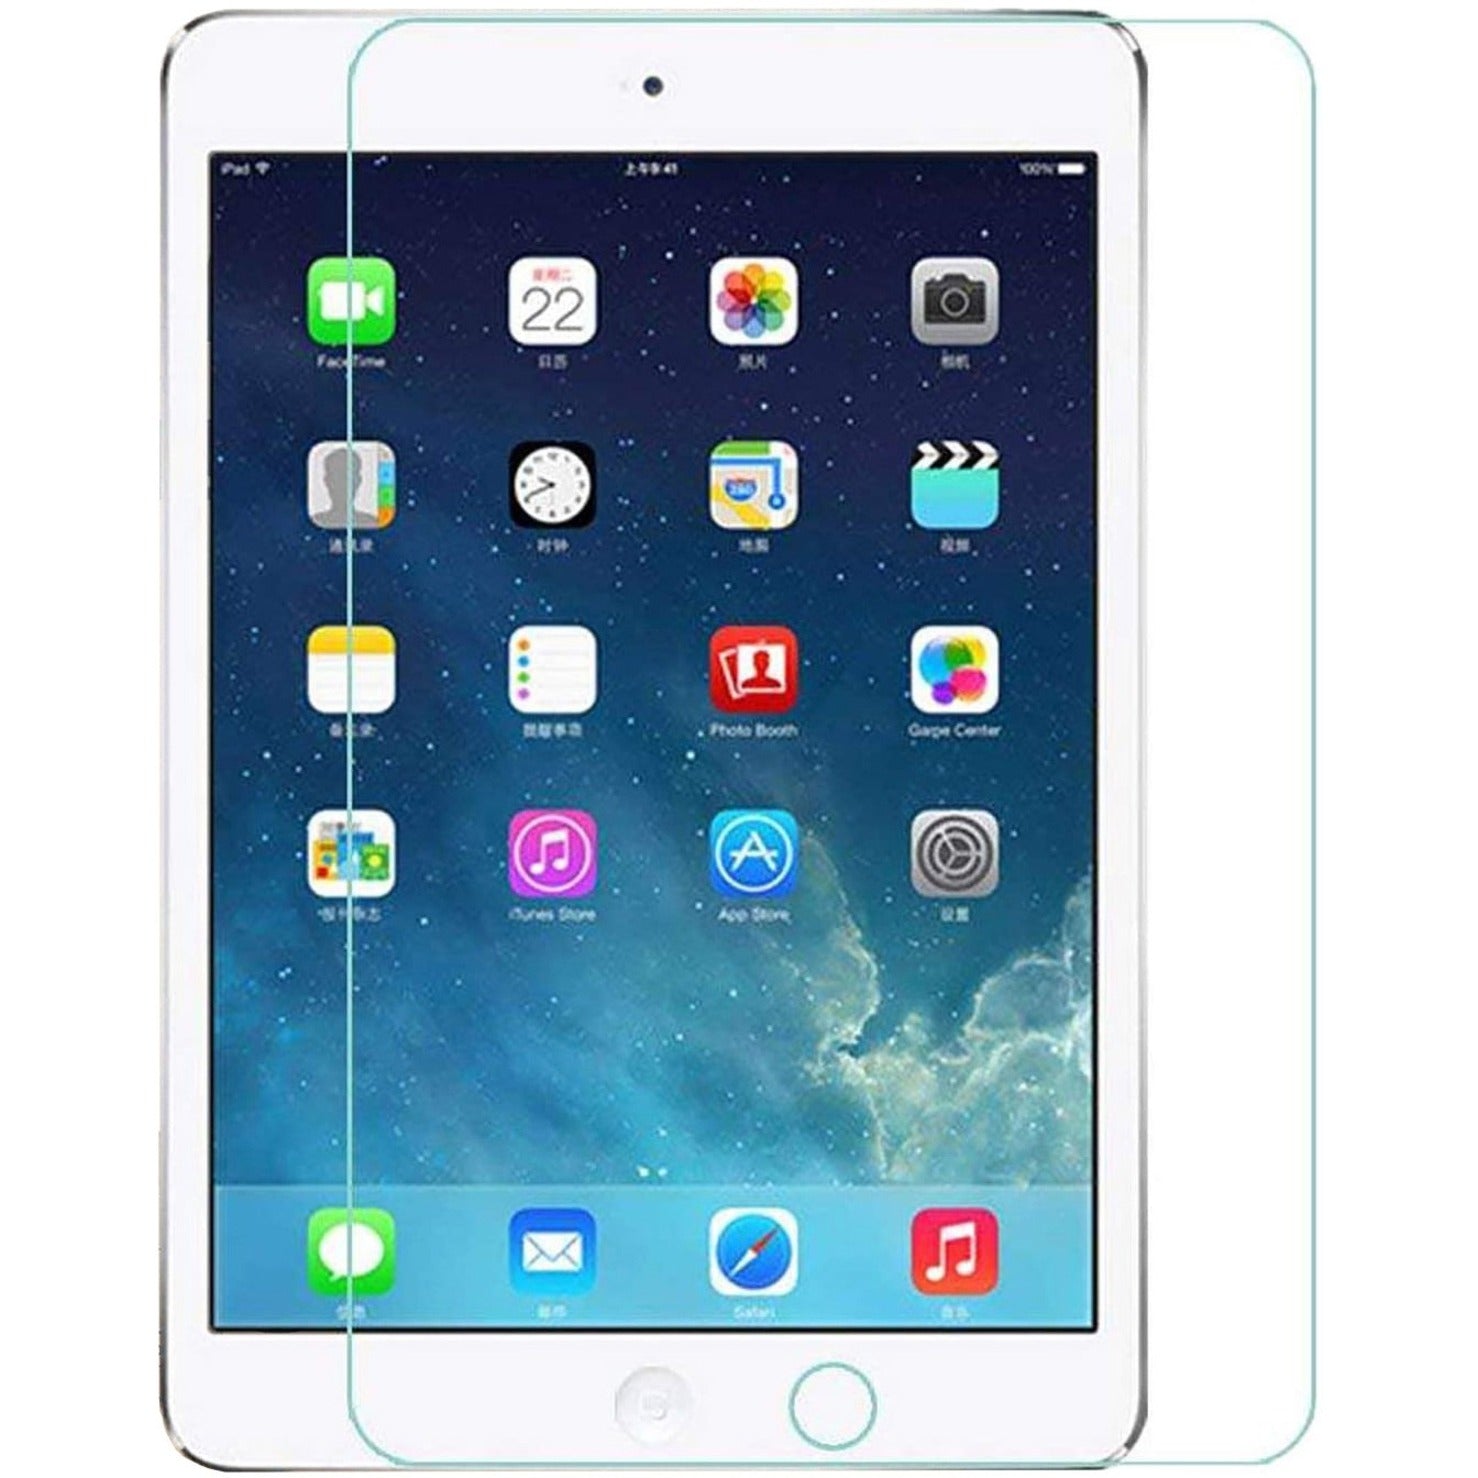 CODi A09036 Tempered Glass Screen Protector for iPad 10.2" Gen 7, 8, 9, Easy to Apply, High Definition Clarity, Touch Sensitive